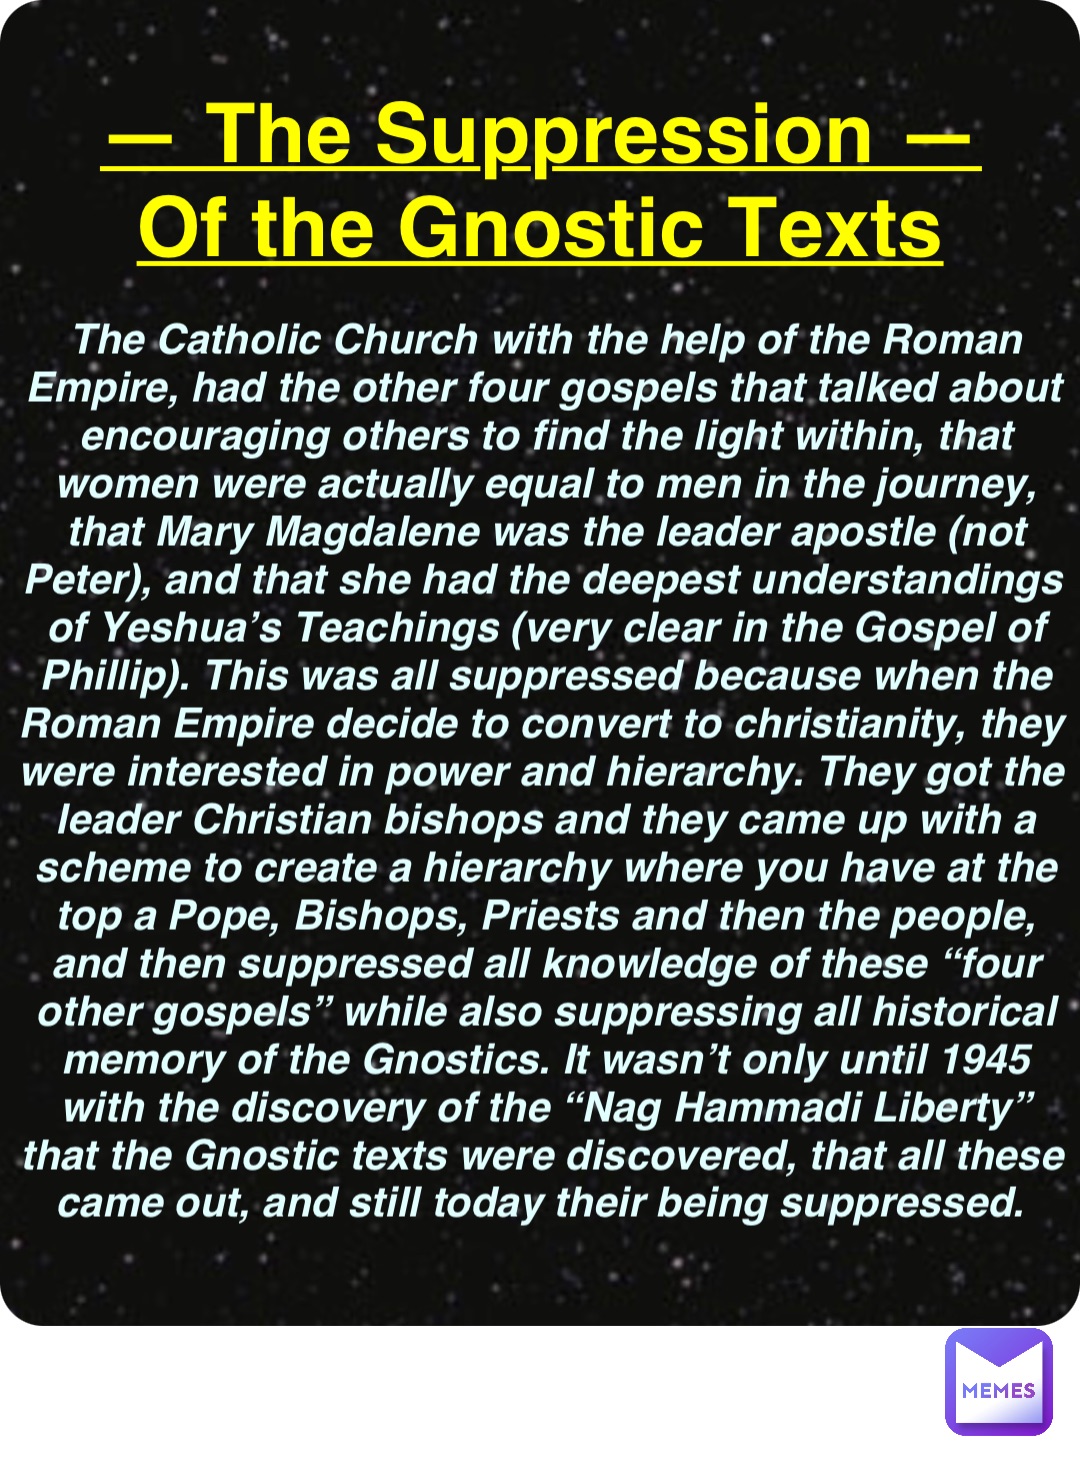 Double tap to edit — The Suppression —
Of the Gnostic Texts The Catholic Church with the help of the Roman Empire, had the other four gospels that talked about encouraging others to find the light within, that women were actually equal to men in the journey, that Mary Magdalene was the leader apostle (not Peter), and that she had the deepest understandings of Yeshua’s Teachings (very clear in the Gospel of Phillip). This was all suppressed because when the Roman Empire decide to convert to christianity, they were interested in power and hierarchy. They got the leader Christian bishops and they came up with a scheme to create a hierarchy where you have at the top a Pope, Bishops, Priests and then the people, and then suppressed all knowledge of these “four other gospels” while also suppressing all historical memory of the Gnostics. It wasn’t only until 1945 with the discovery of the “Nag Hammadi Liberty” that the Gnostic texts were discovered, that all these came out, and still today their being suppressed.